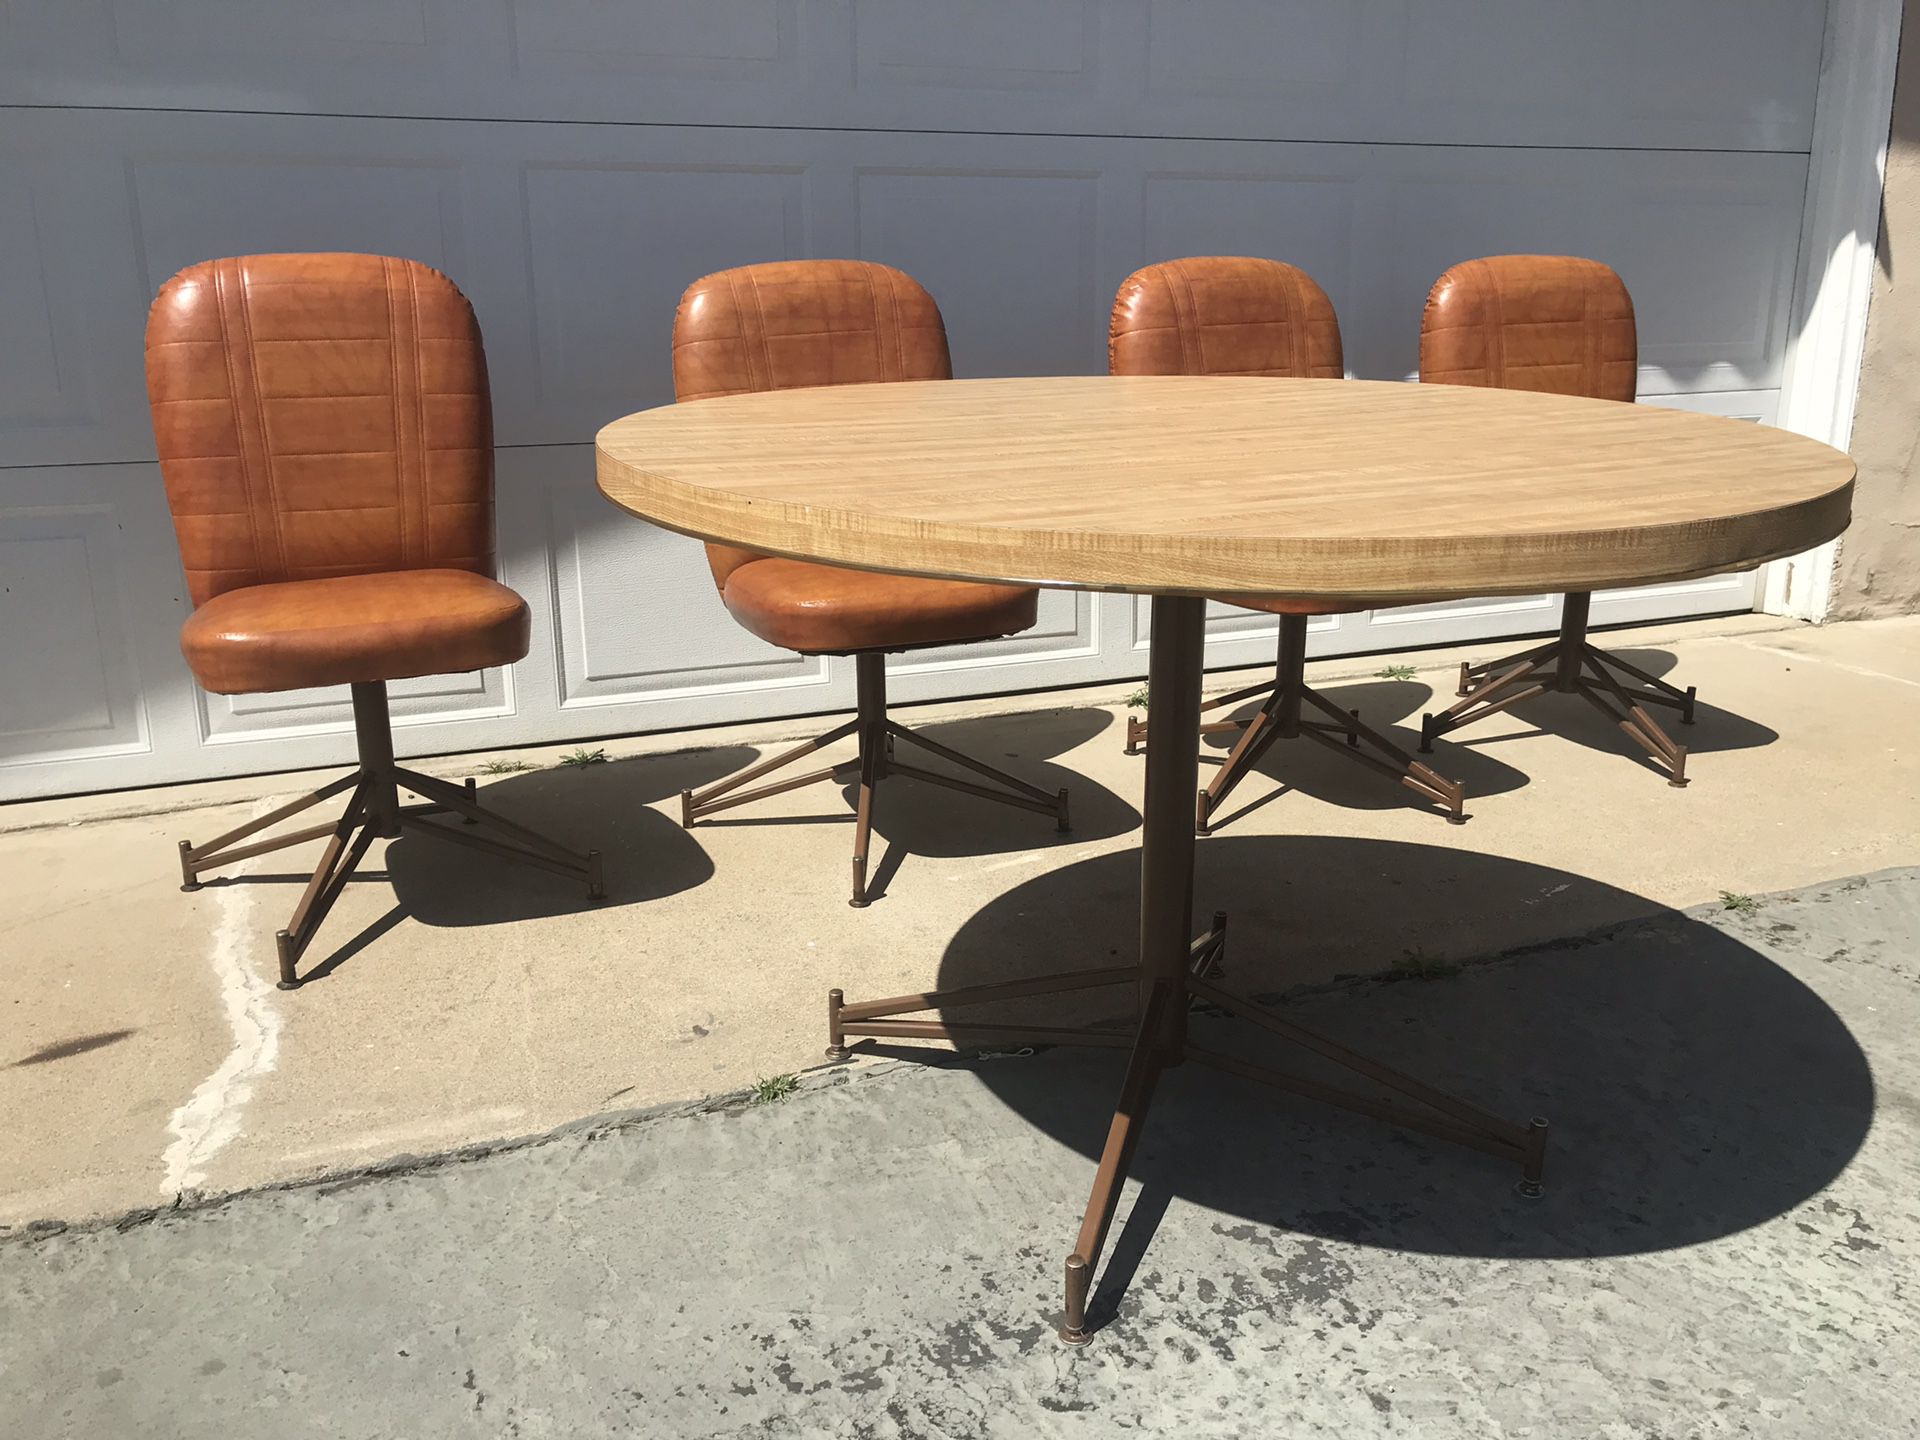 Vintage mid century round table with matching chairs